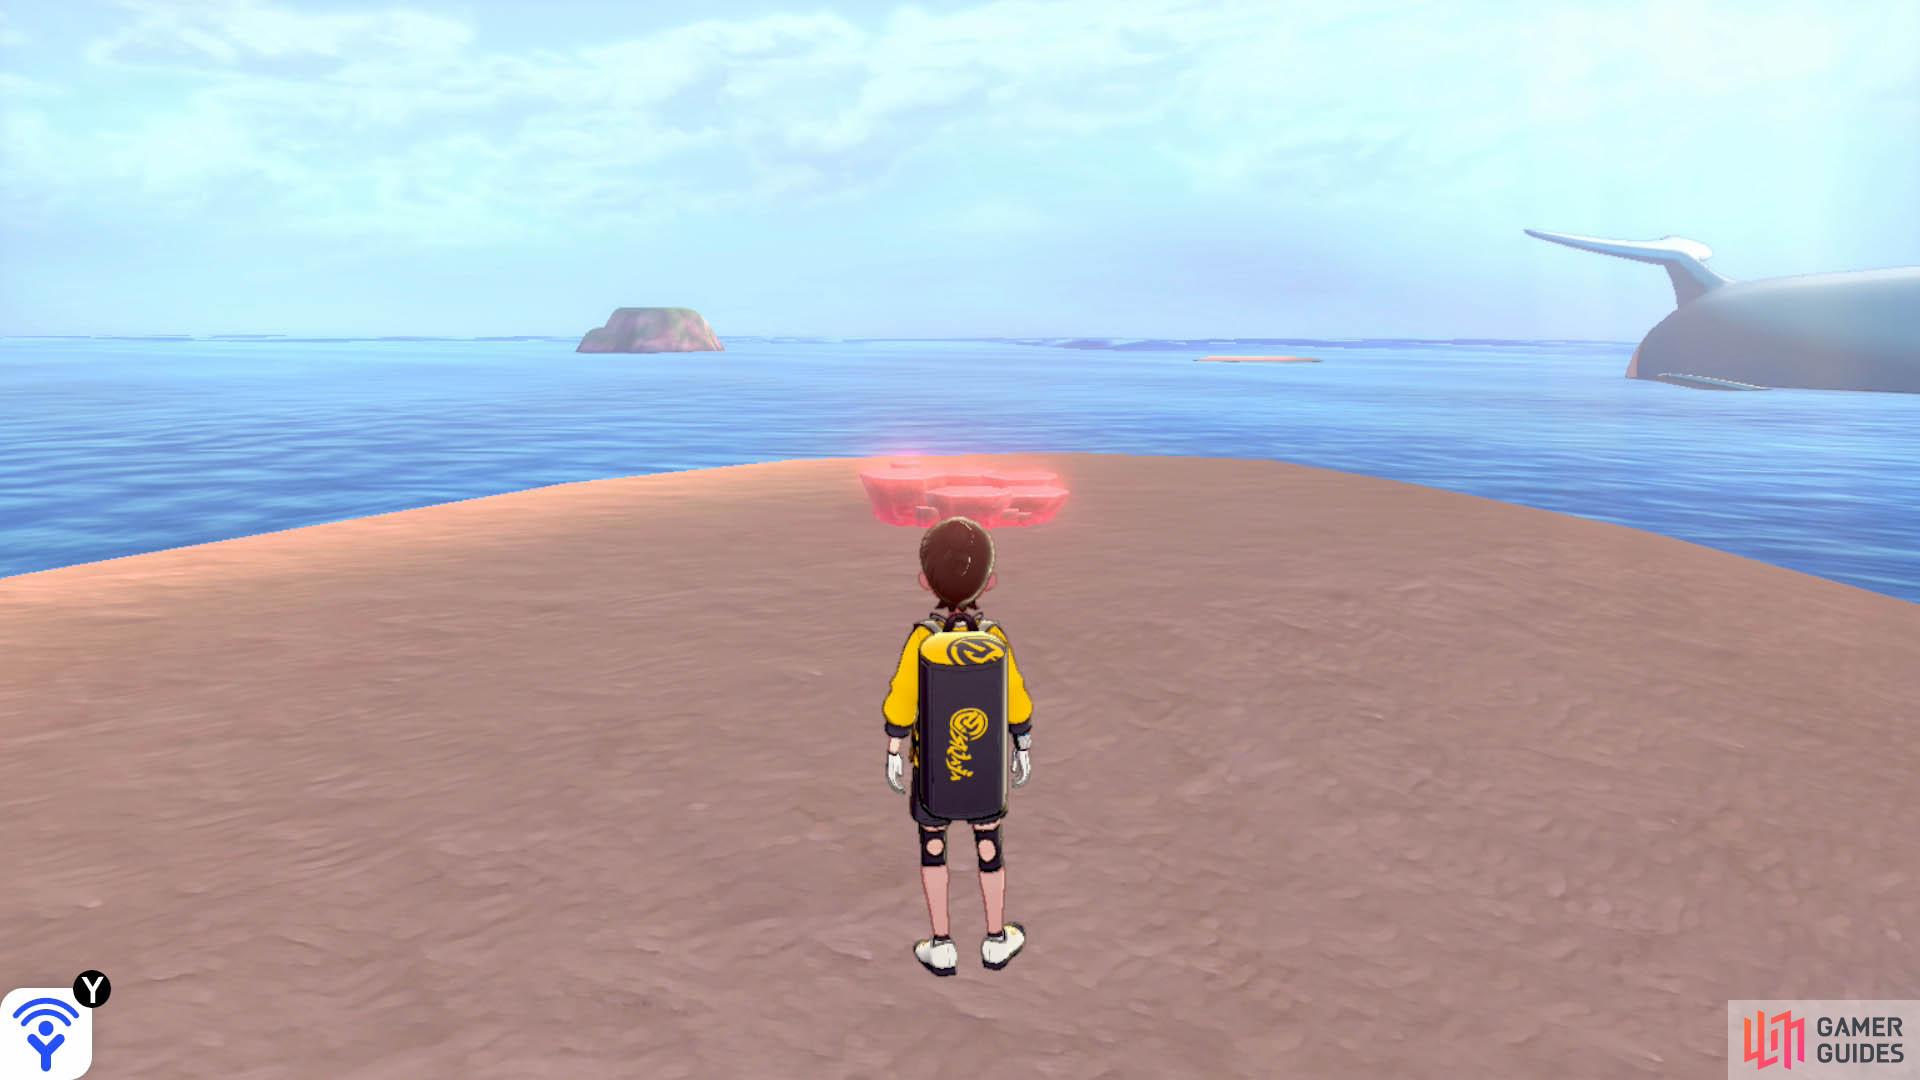 Head for the islet directly opposite Armor Station. With your back facing Armor Station, turn slightly left. Swim towards the longer islet directly ahead. This den is located on the top half of that islet.